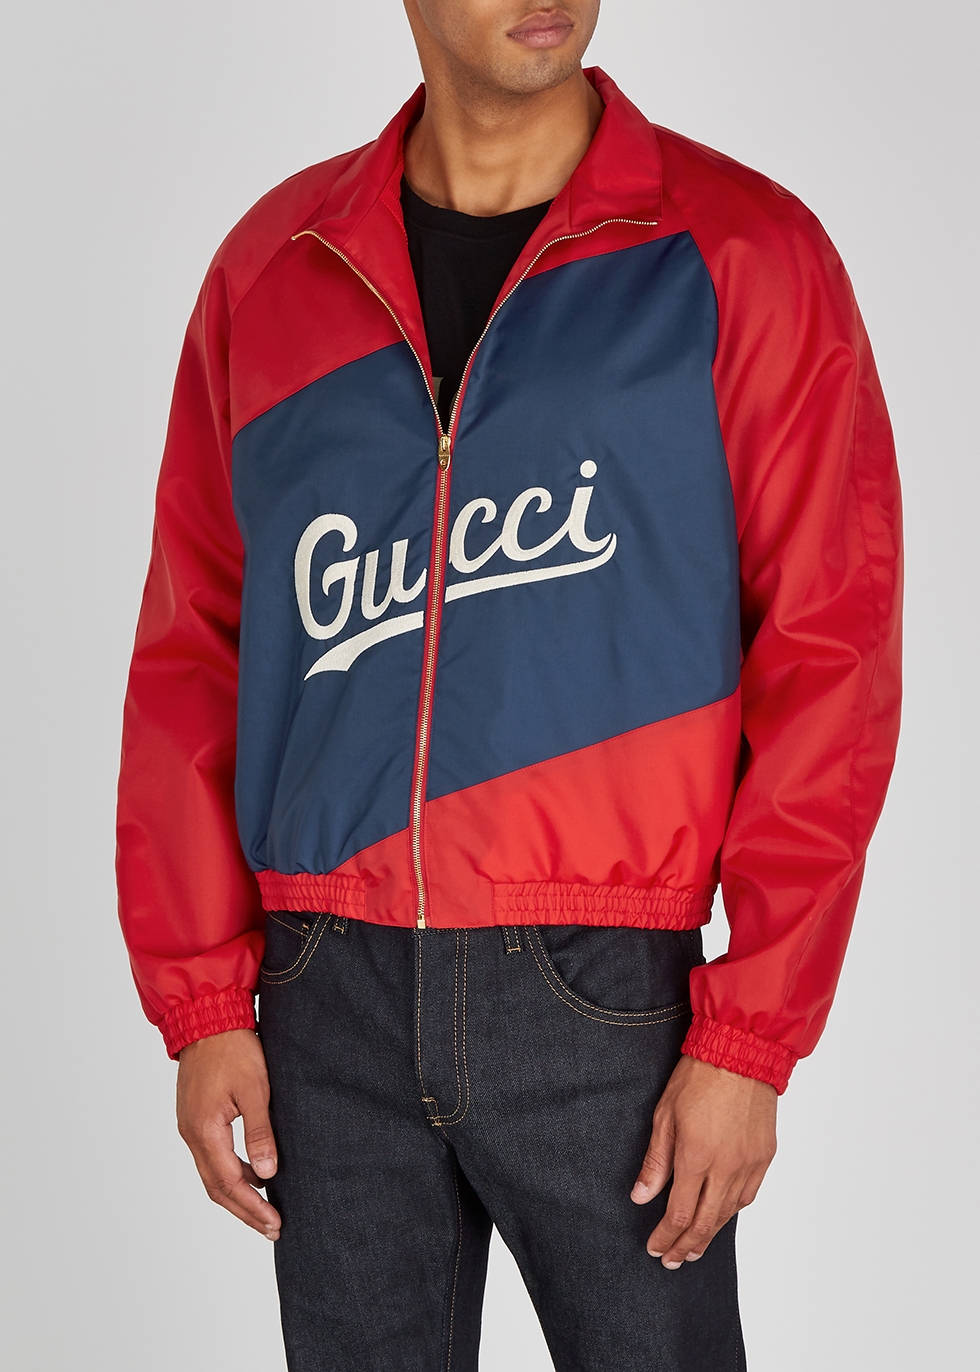 gucci red and blue